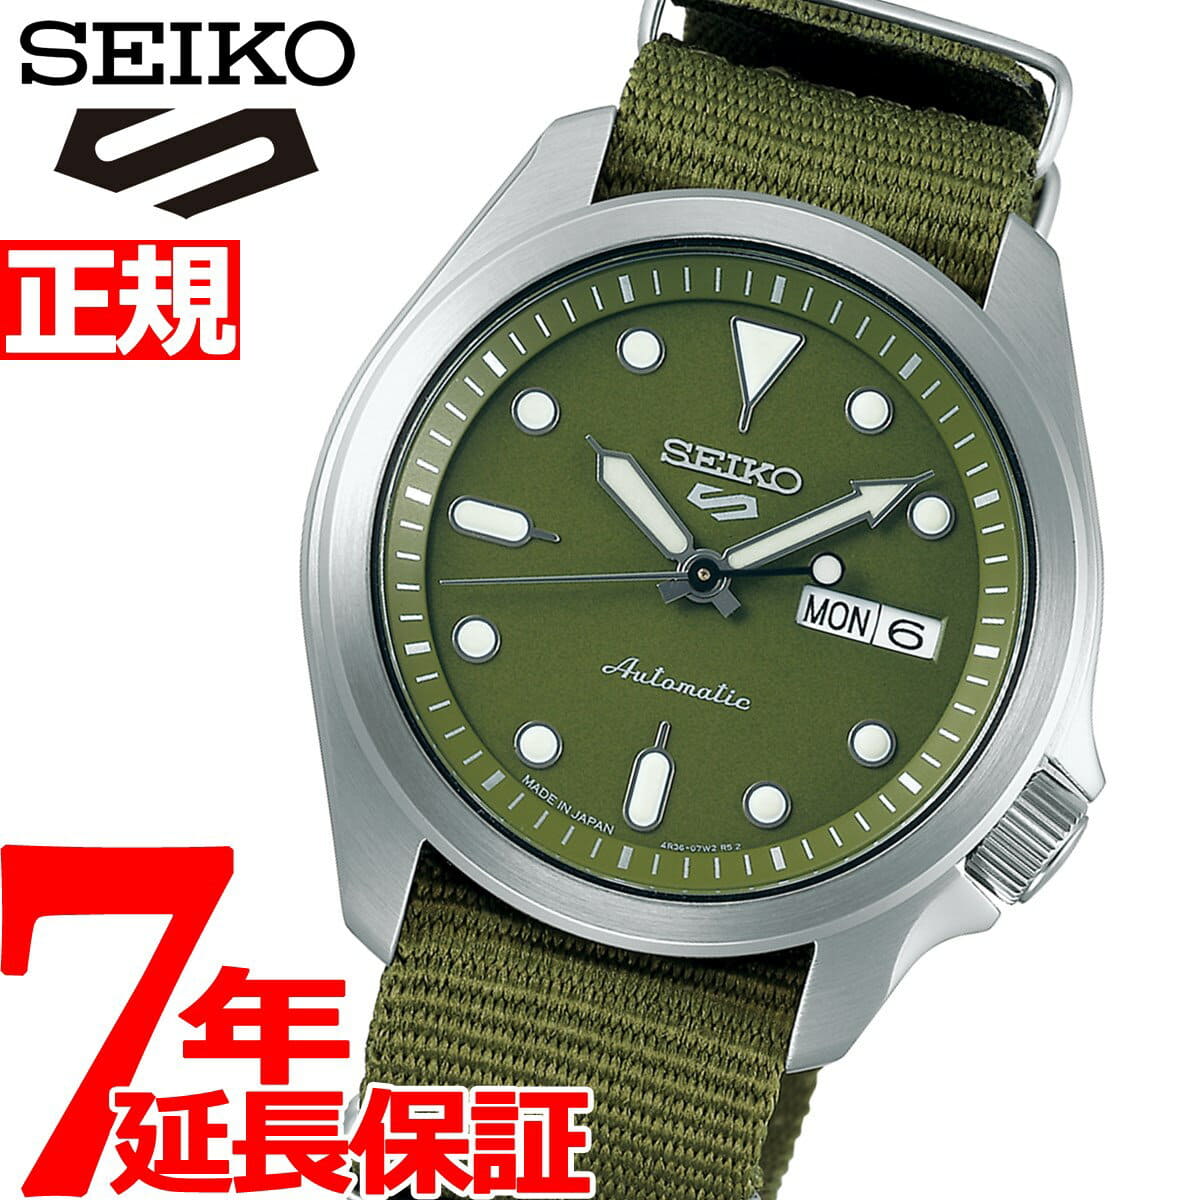 New]SEIKO 5 SPORTS Men's Automatic Mechanical Watch Limited Model SBSA055 -  BE FORWARD Store